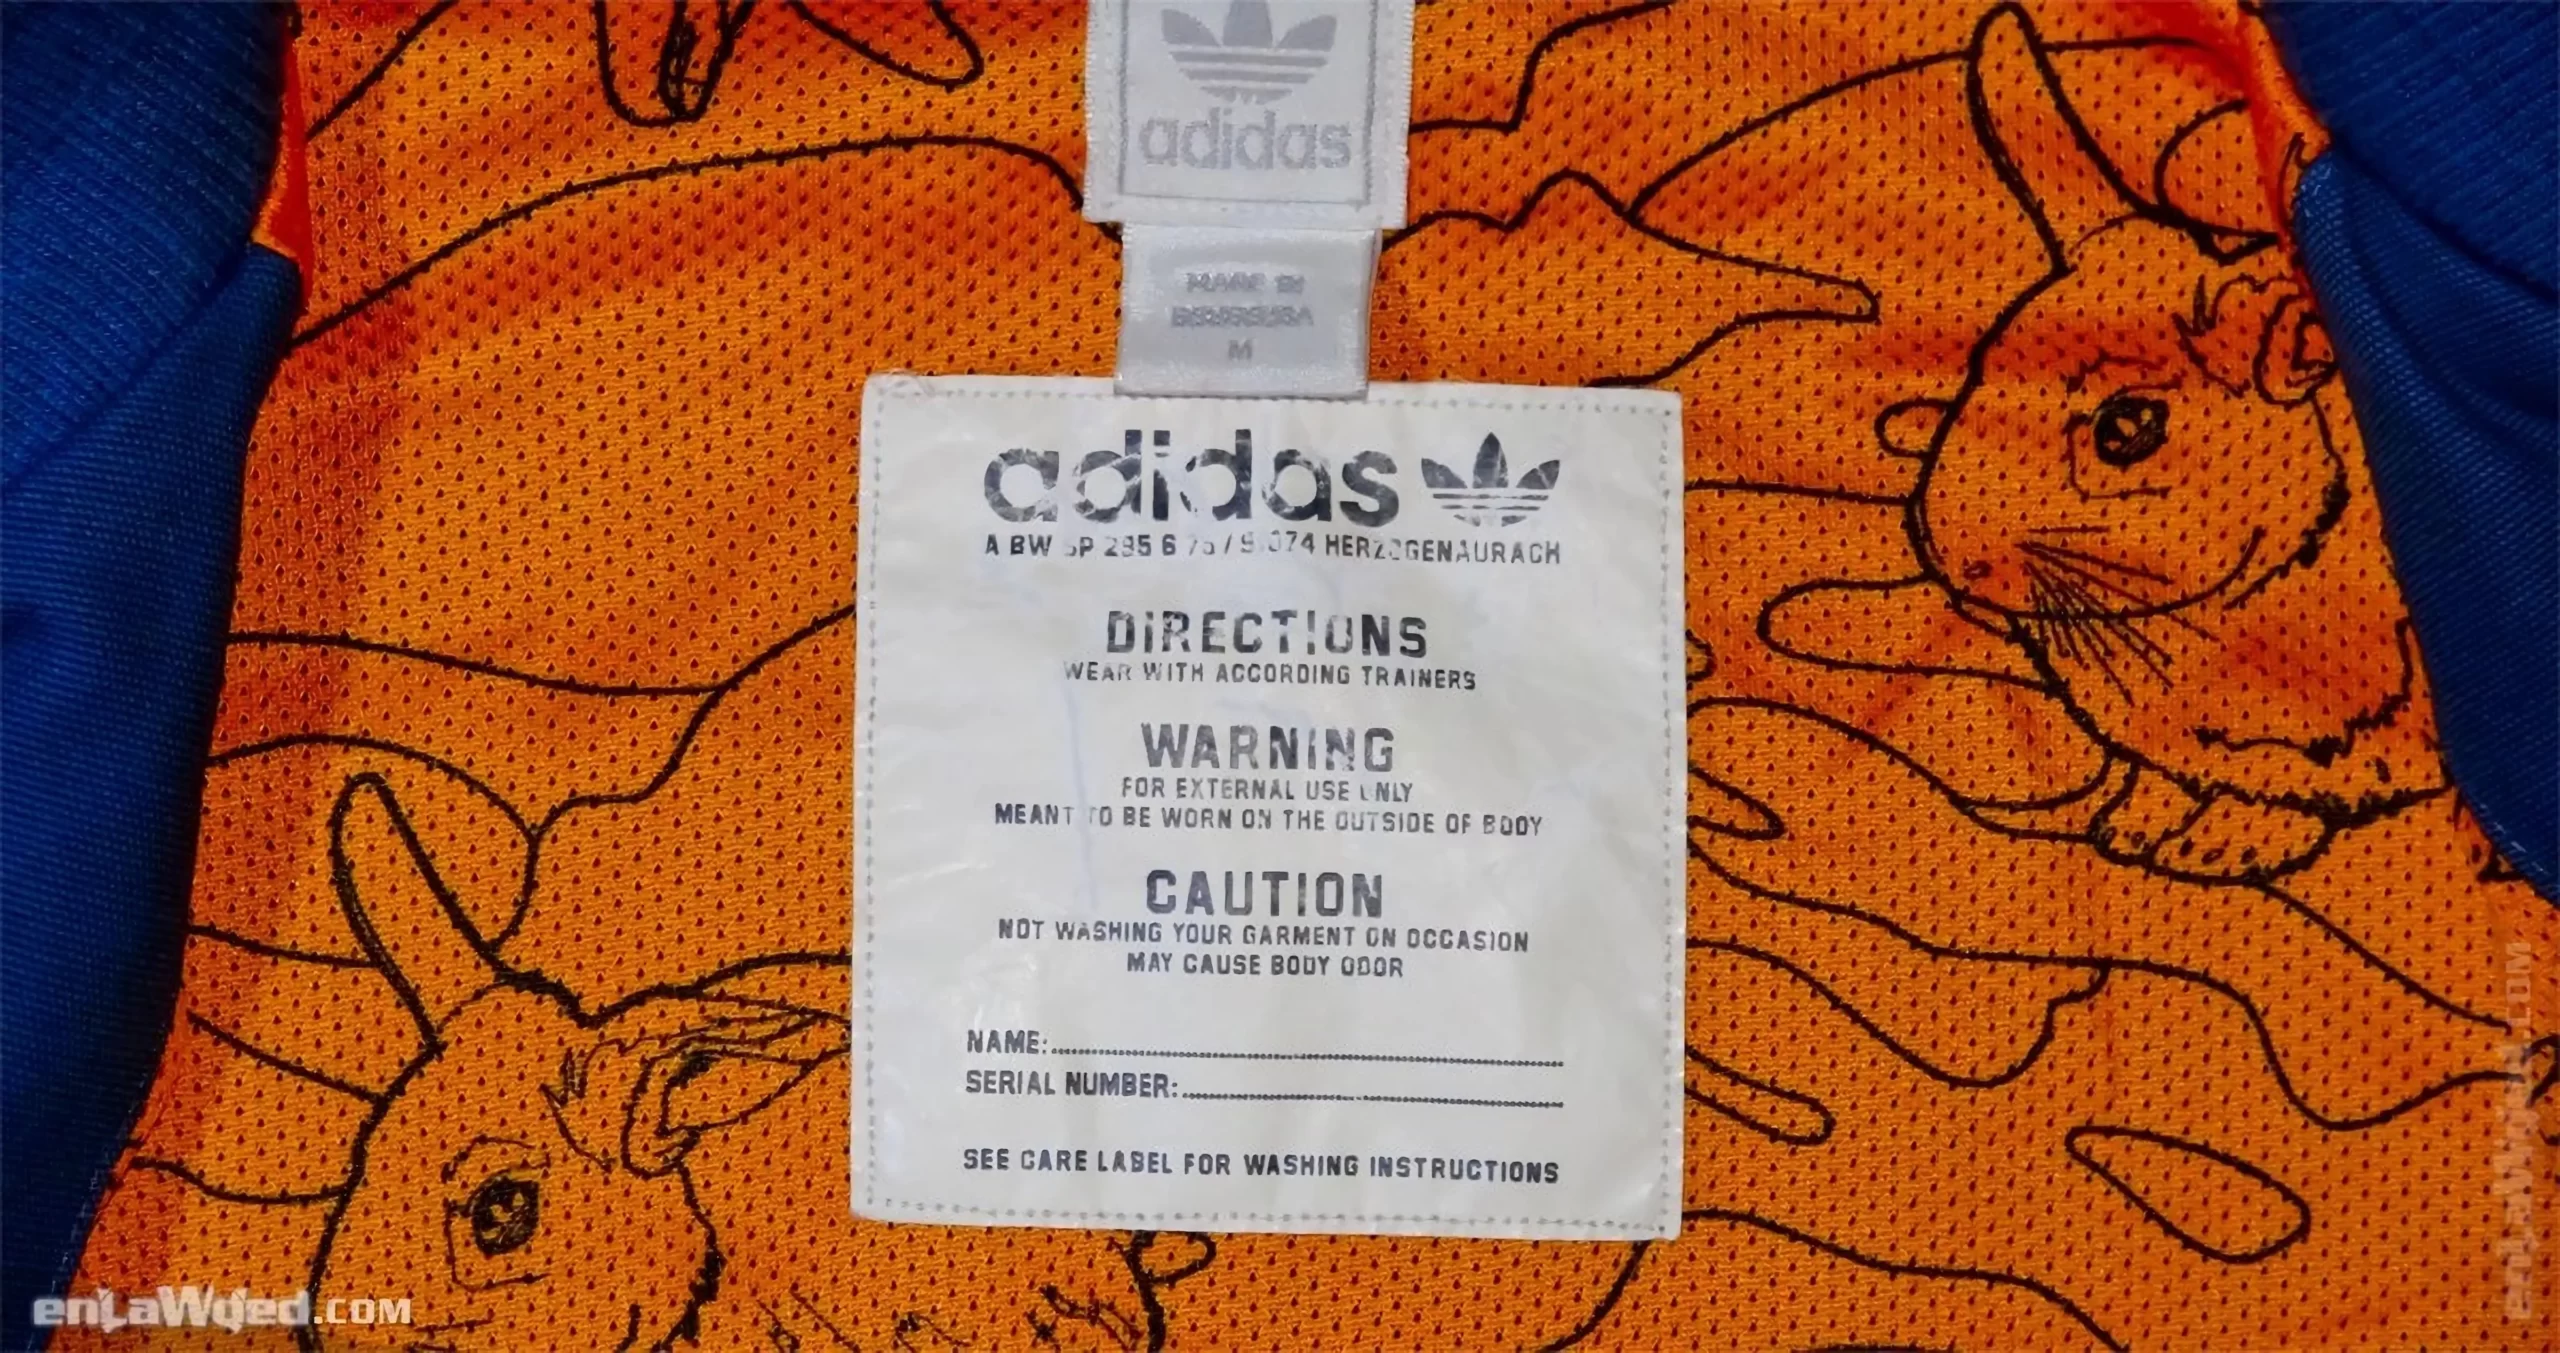 Men’s 2005 Adidas Originals Military Peace Jacket: Unstoppable (EnLawded.com file #lmchc0fpc06o0e9mwif)